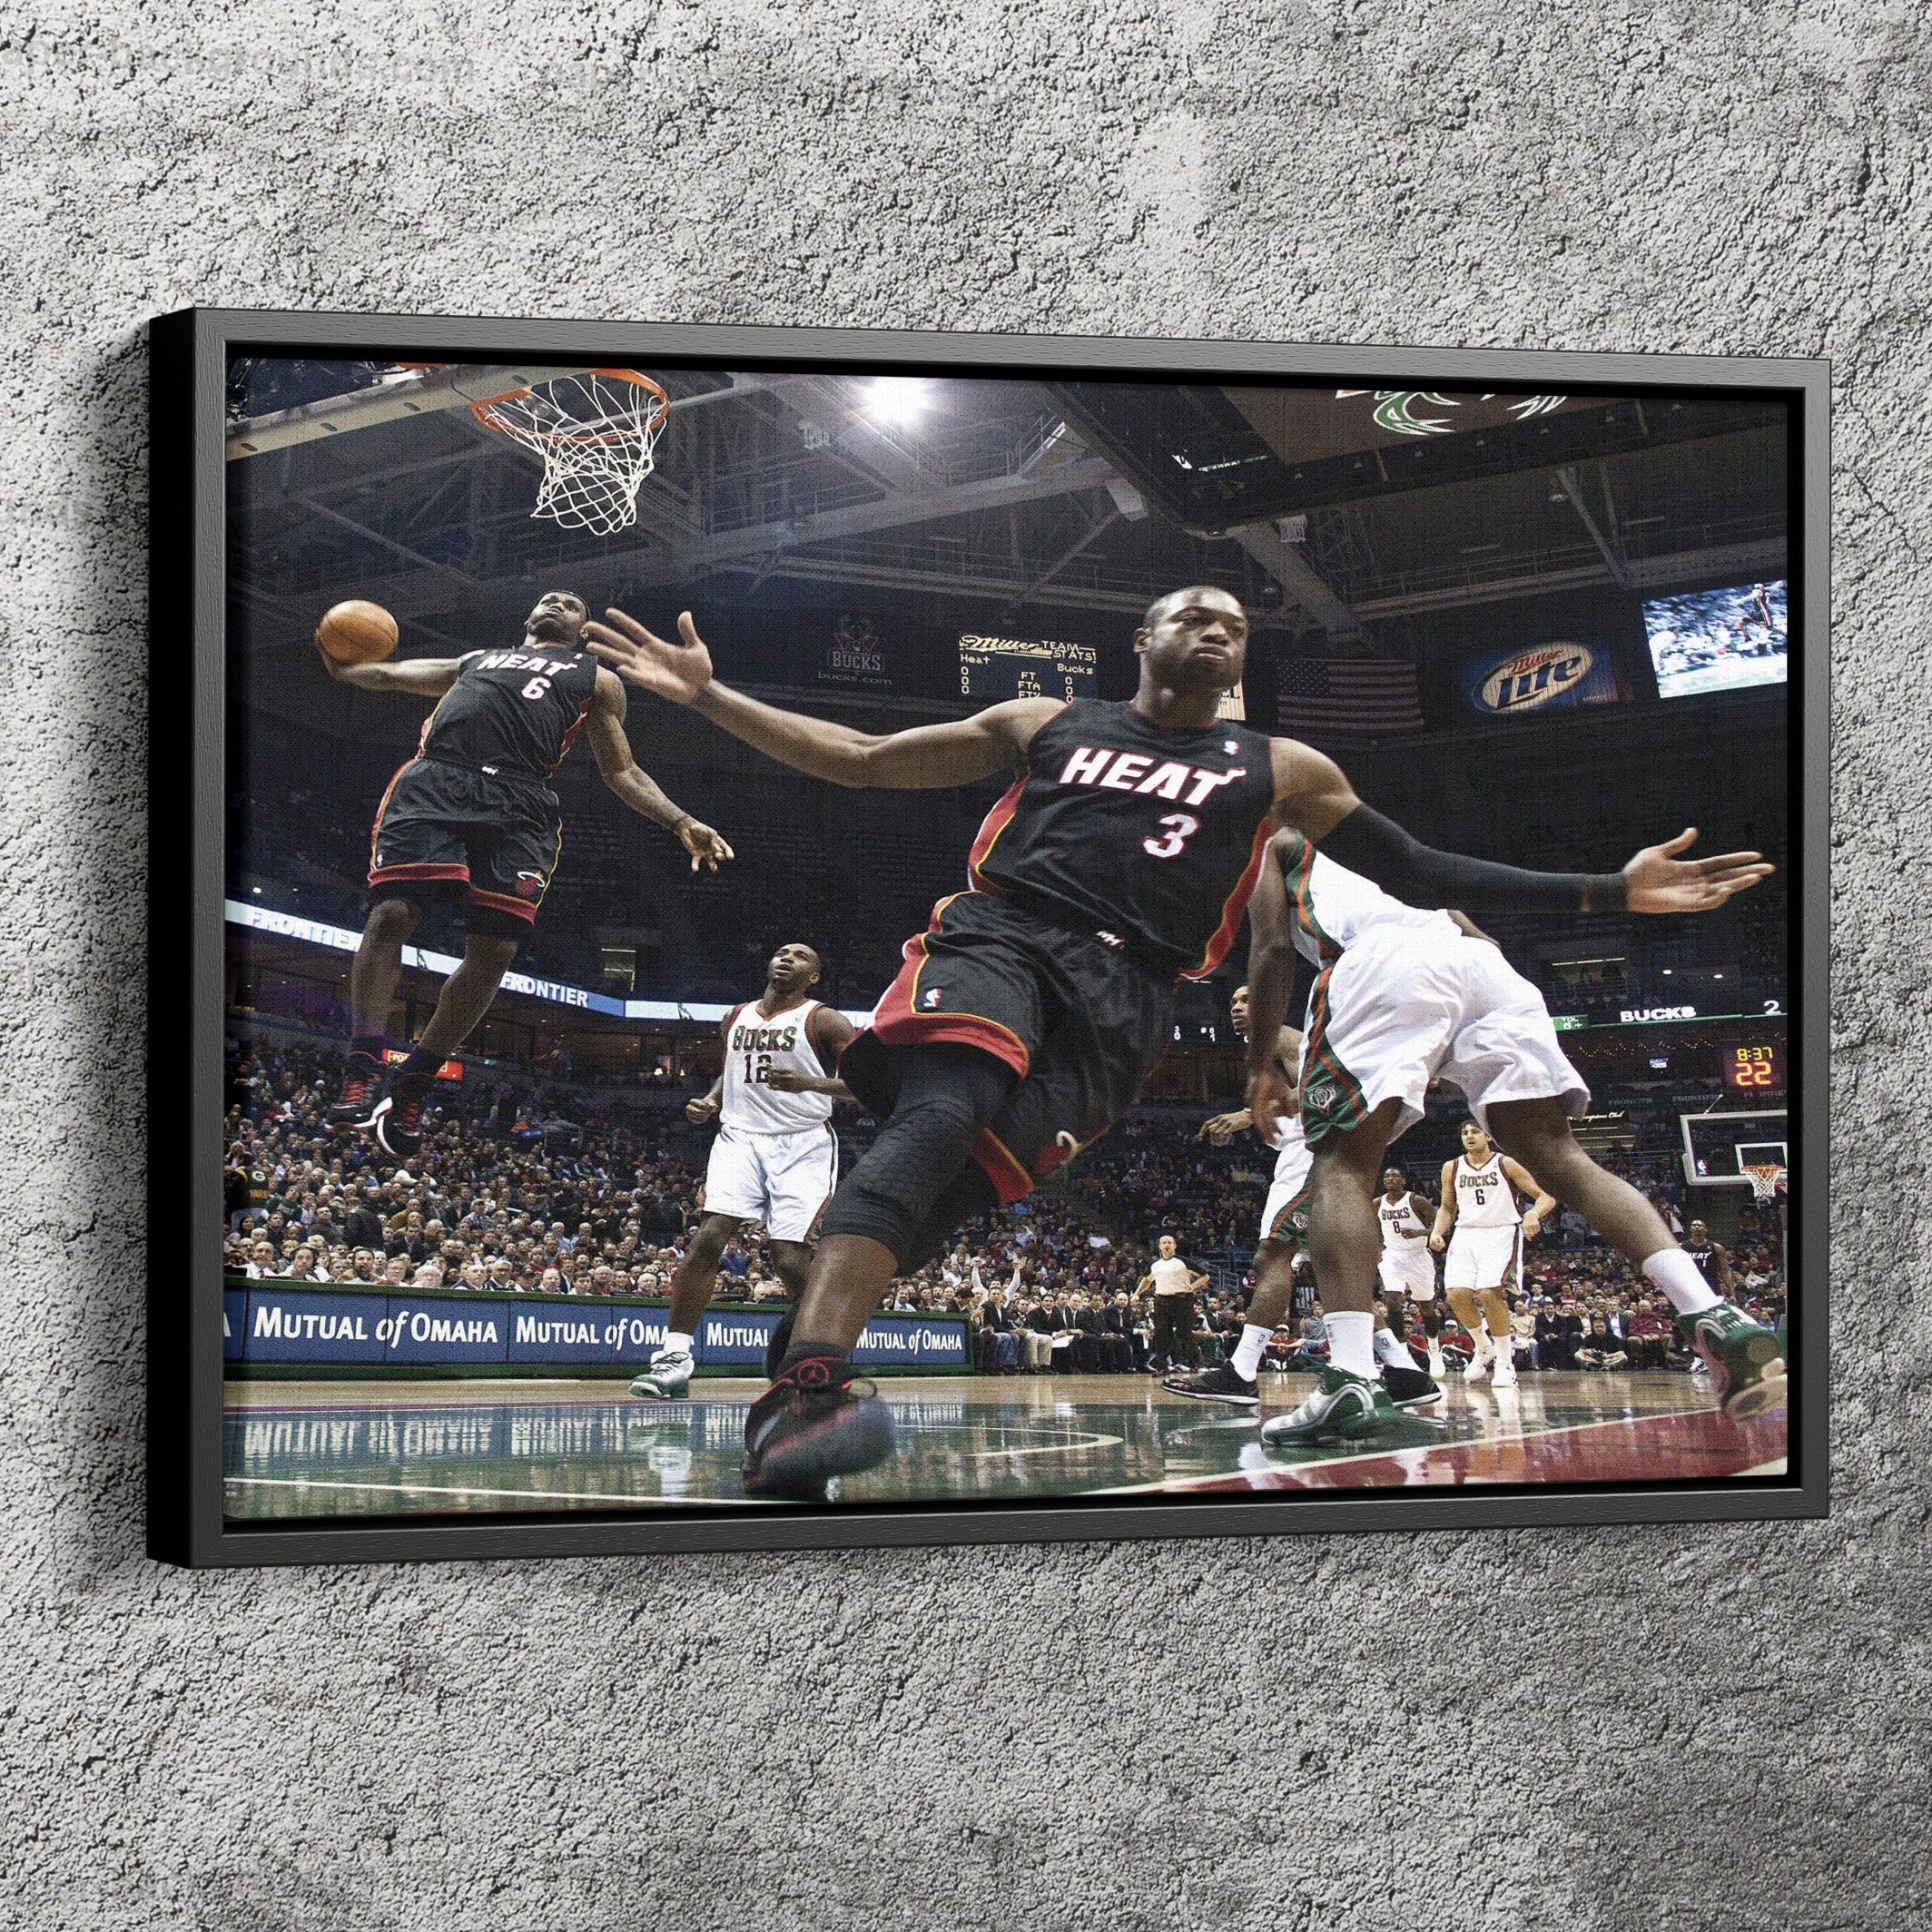  Dwayne Wade - Póster De Personalidad De Jugador De Baloncesto  Para Pared Canvas Art Poster And Wall Art Picture Print Modern Family  Bedroom Decor Posters Room Aesthetic Frame-style 08x12inch(20x30cm):  Posters 